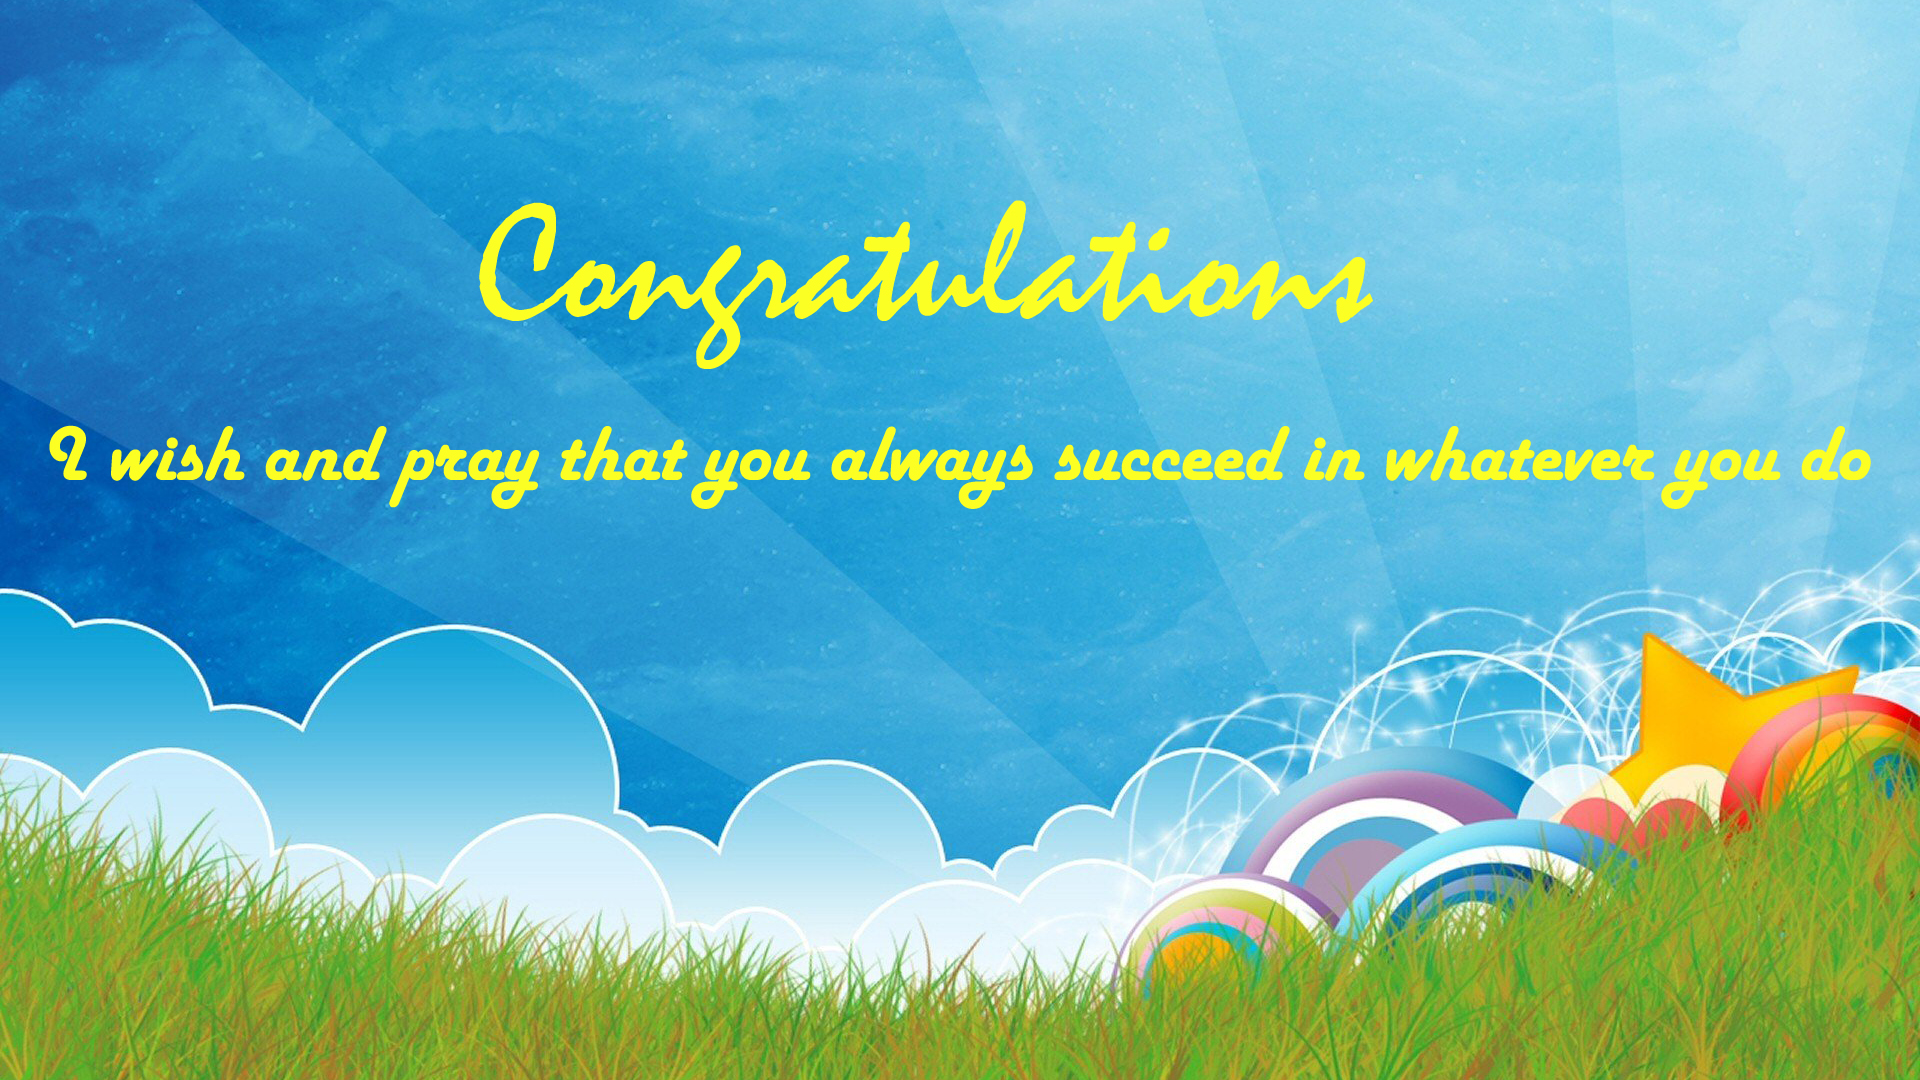 Congratulation Images Free With Quotes - Hd Wallpapers 995